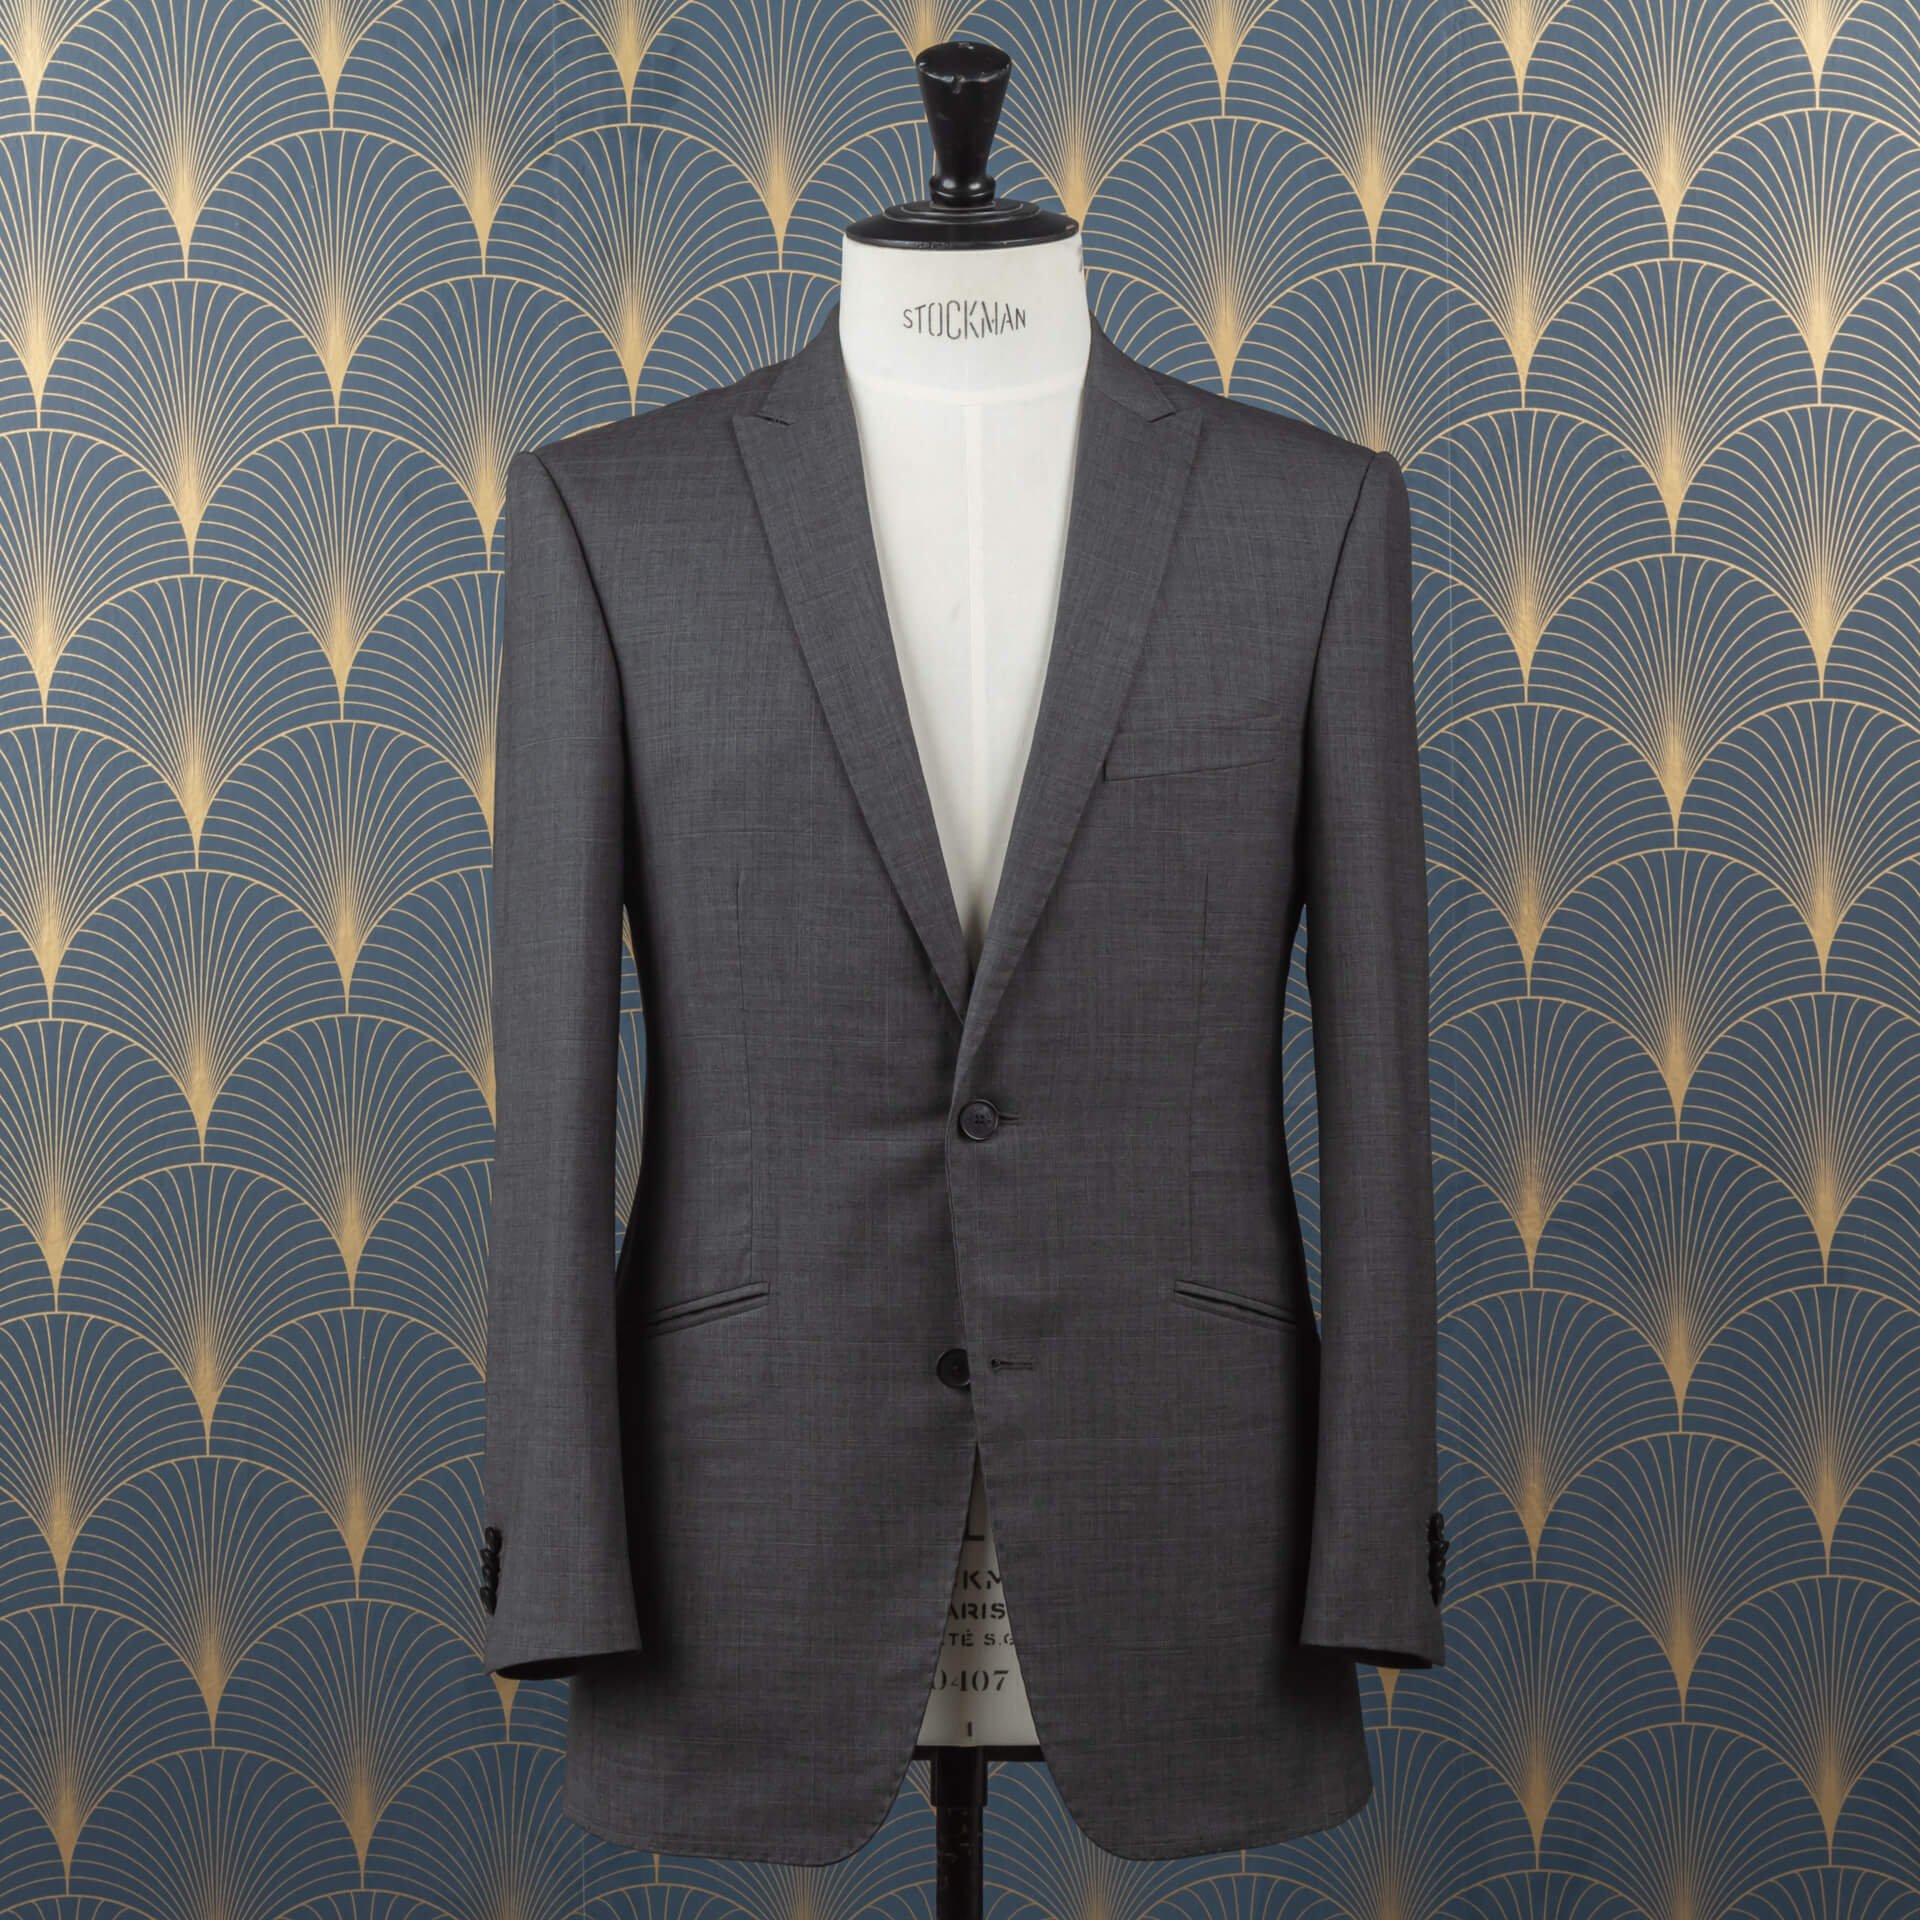 How to Create Your Own Custom Suit or Tuxedo